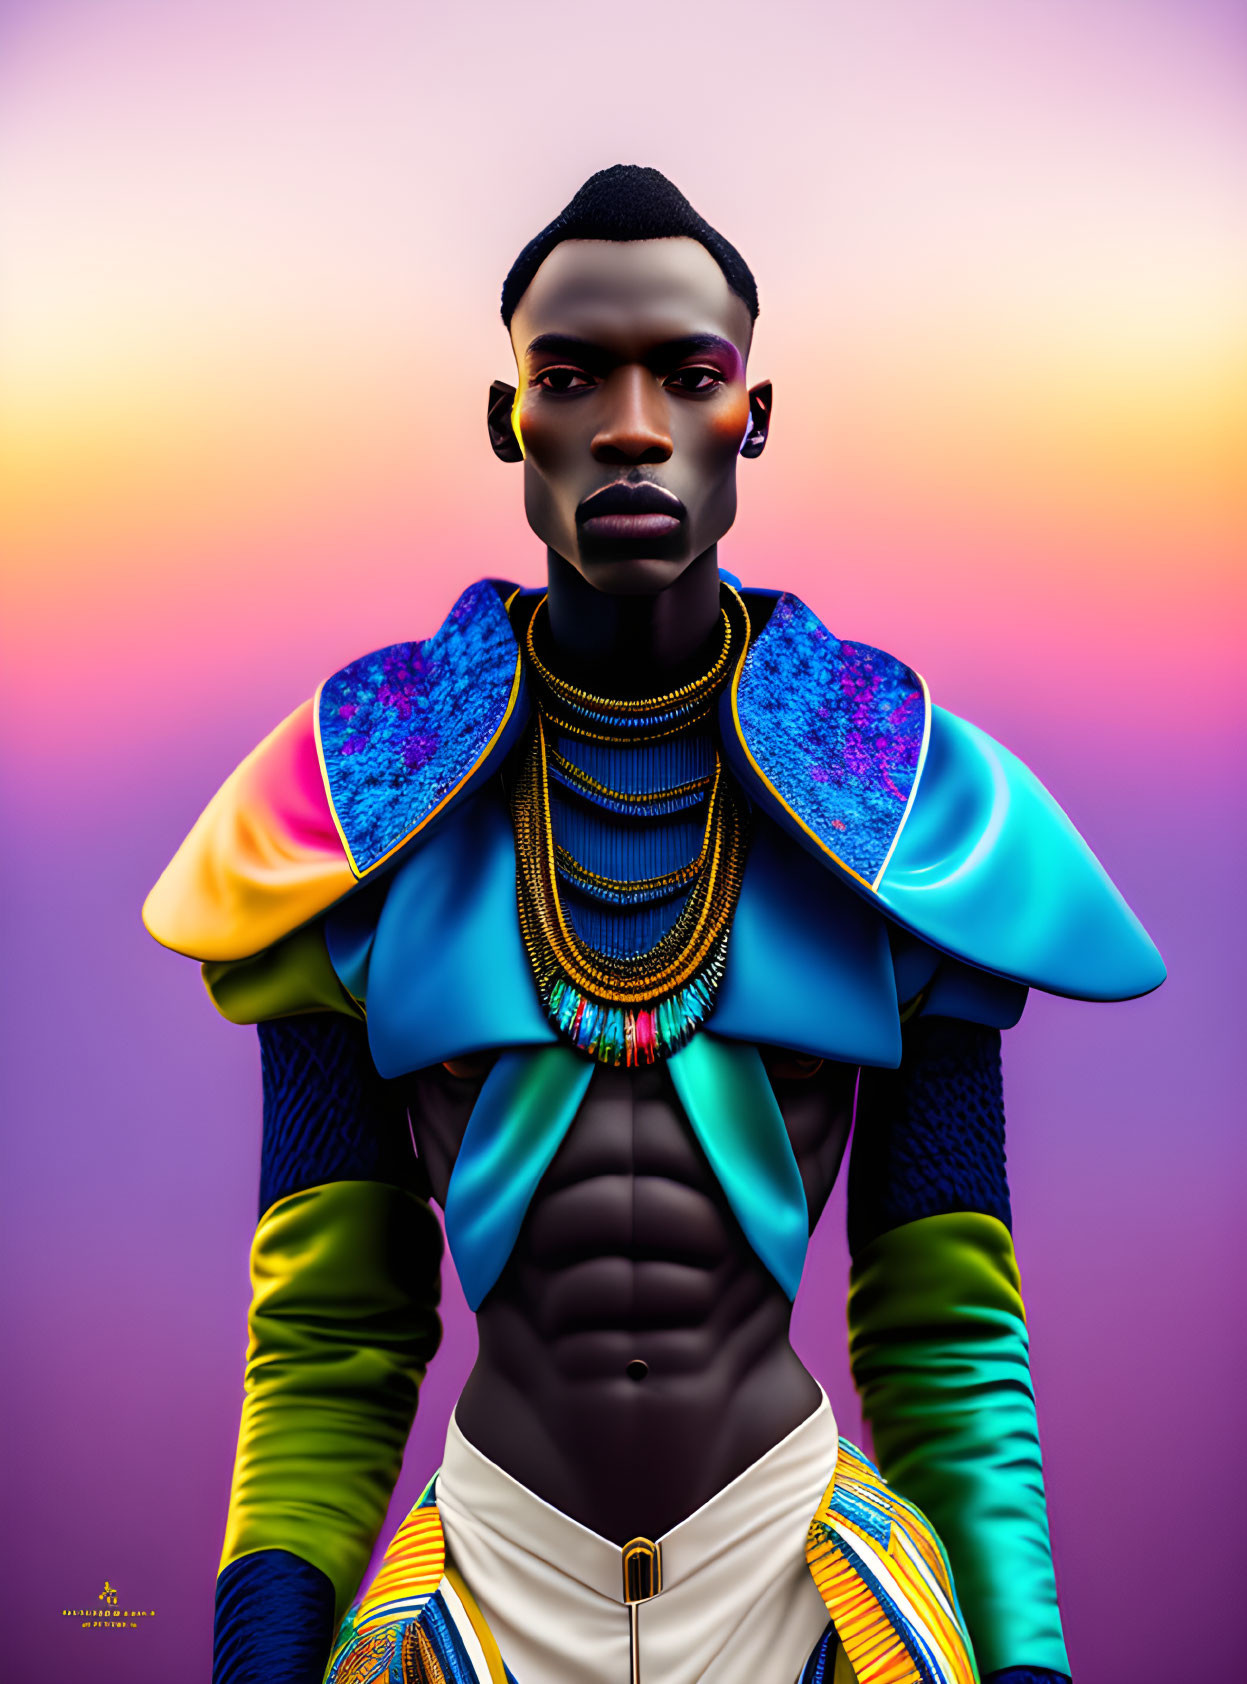 Stylized male figure in futuristic outfit with metallic accents